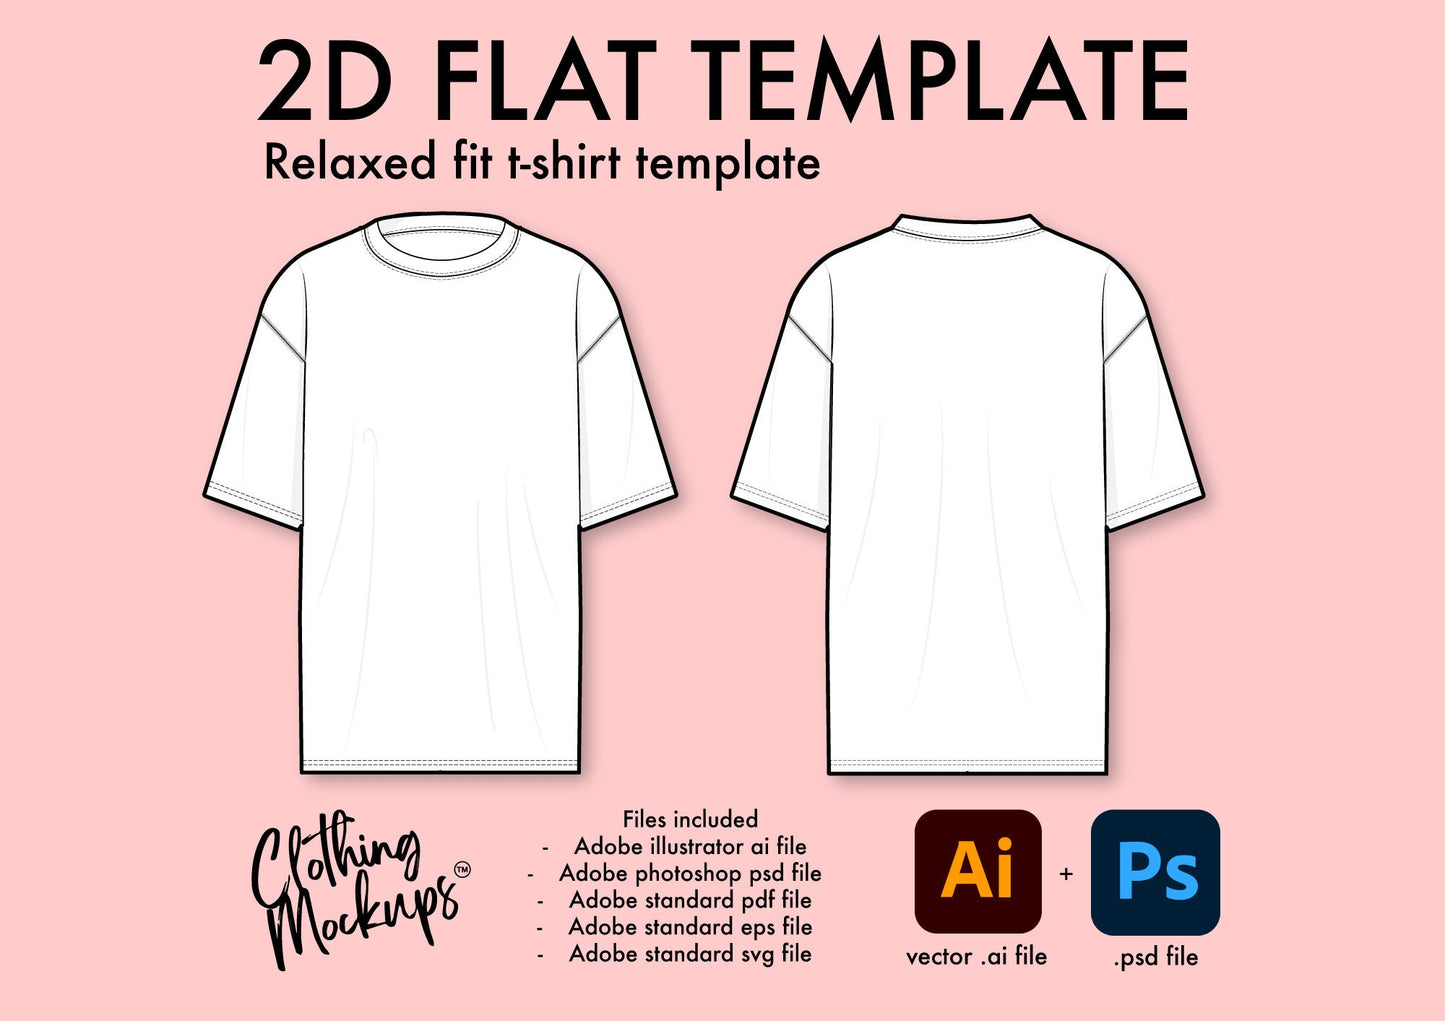 Flat Technical Drawing - Relaxed fit t-shirt template